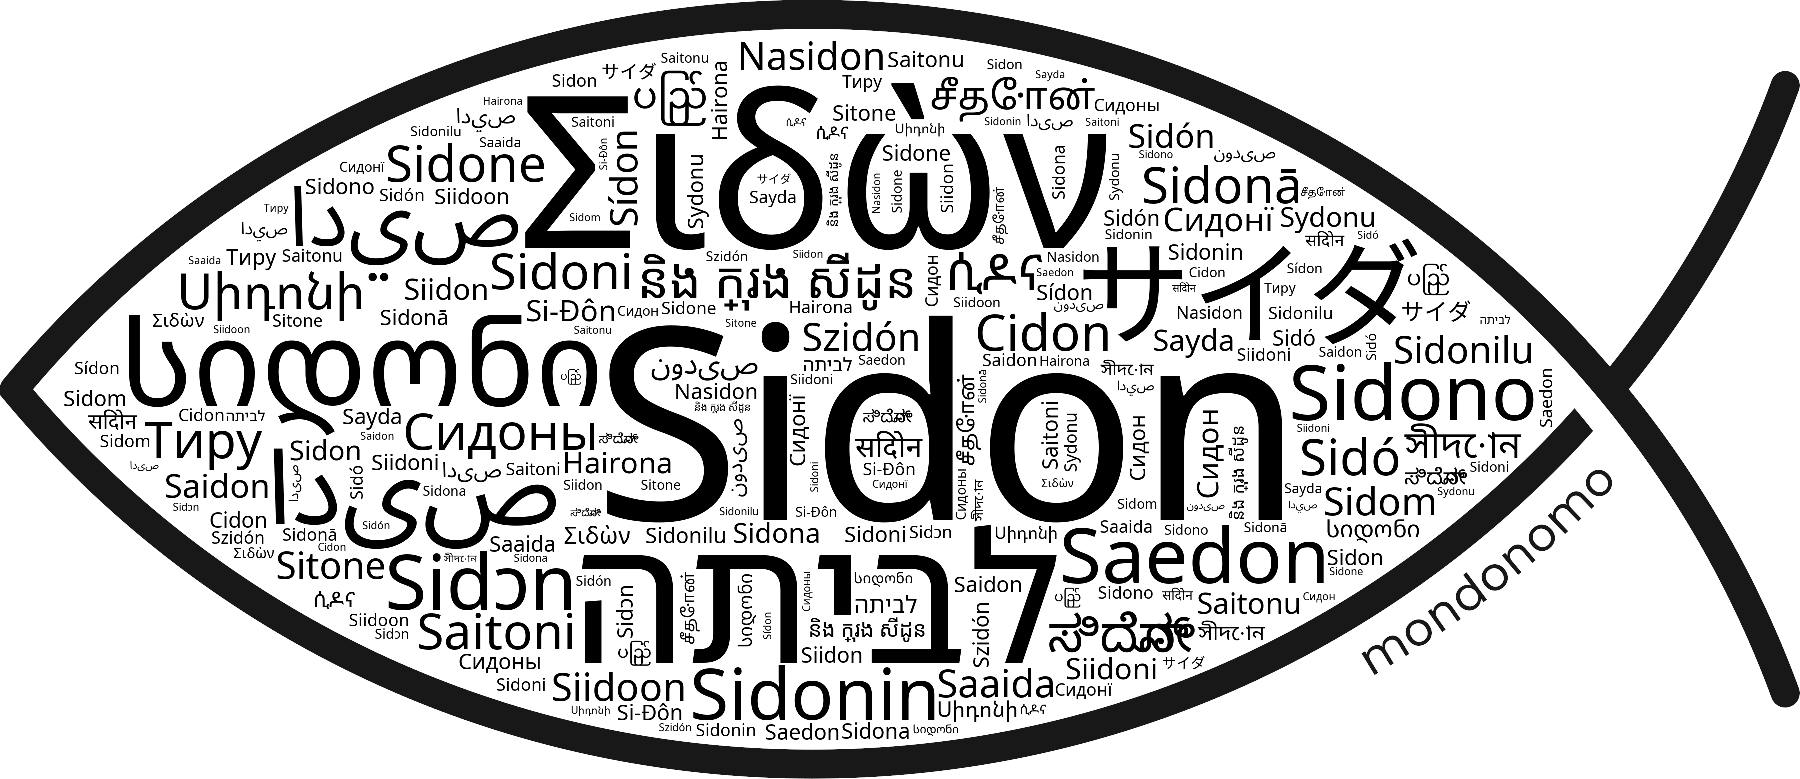 Name Sidon in the world's Bibles